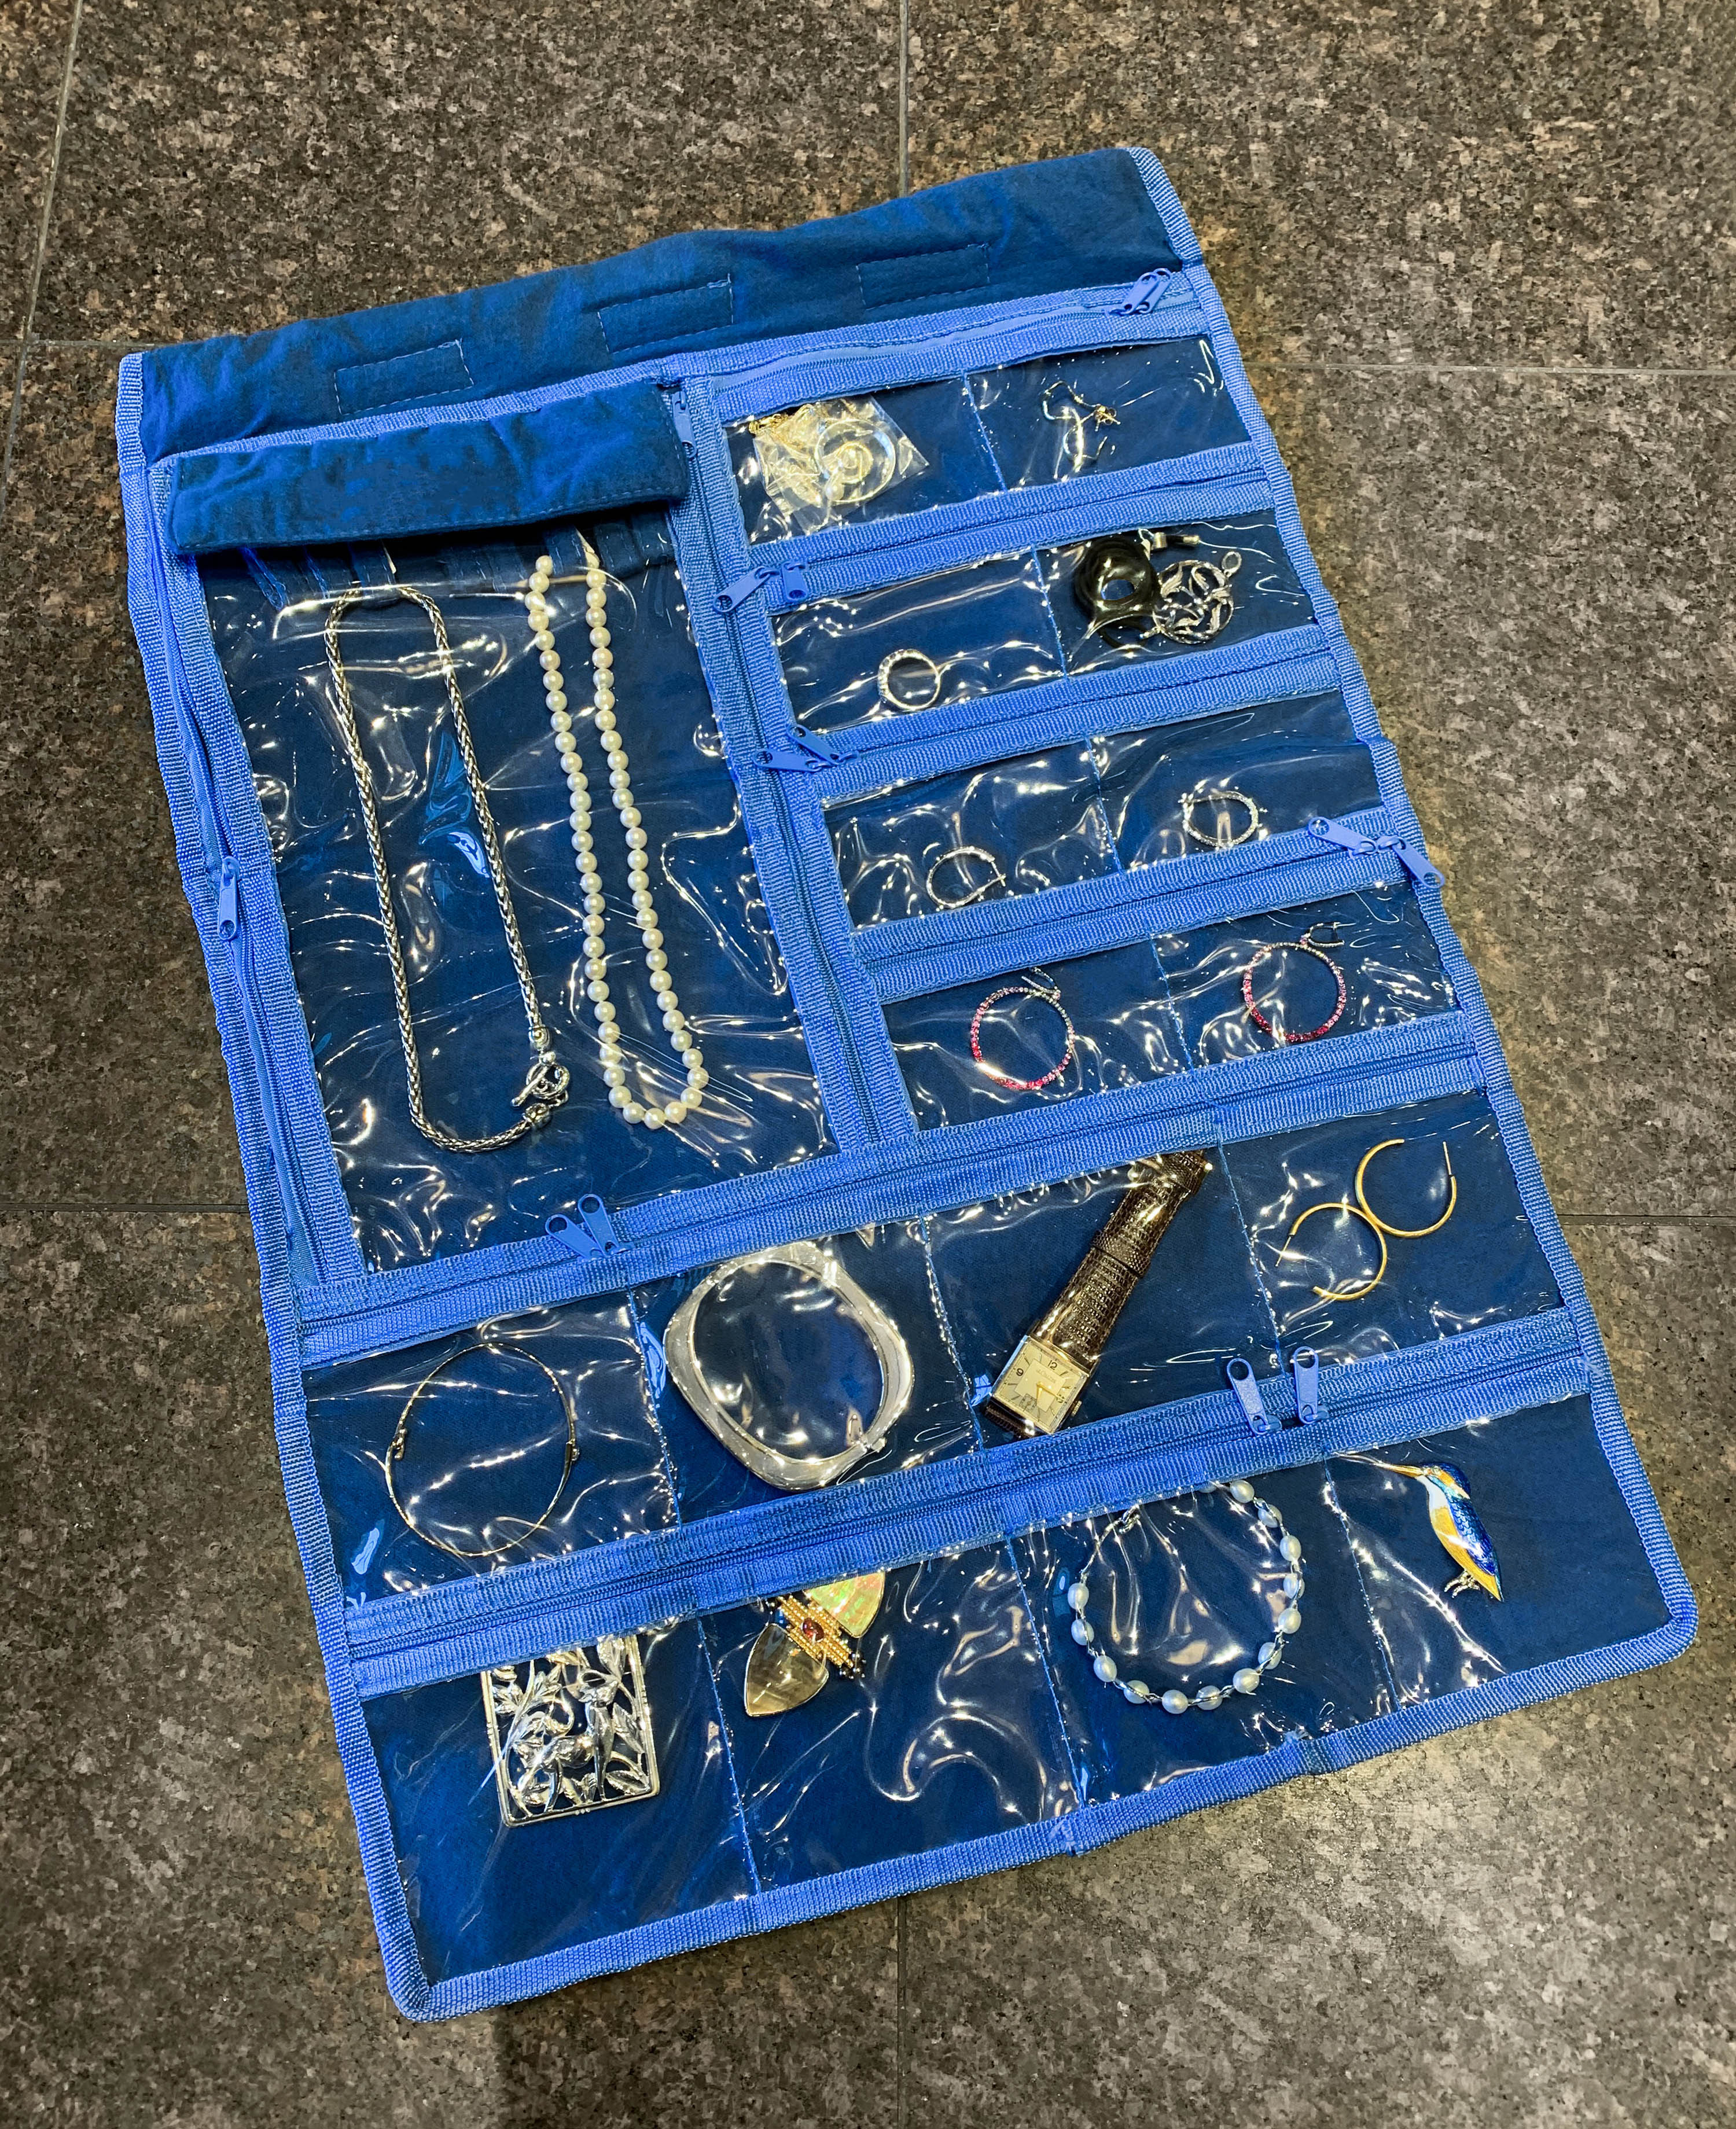 How To Organize and Care for Your Jewelry